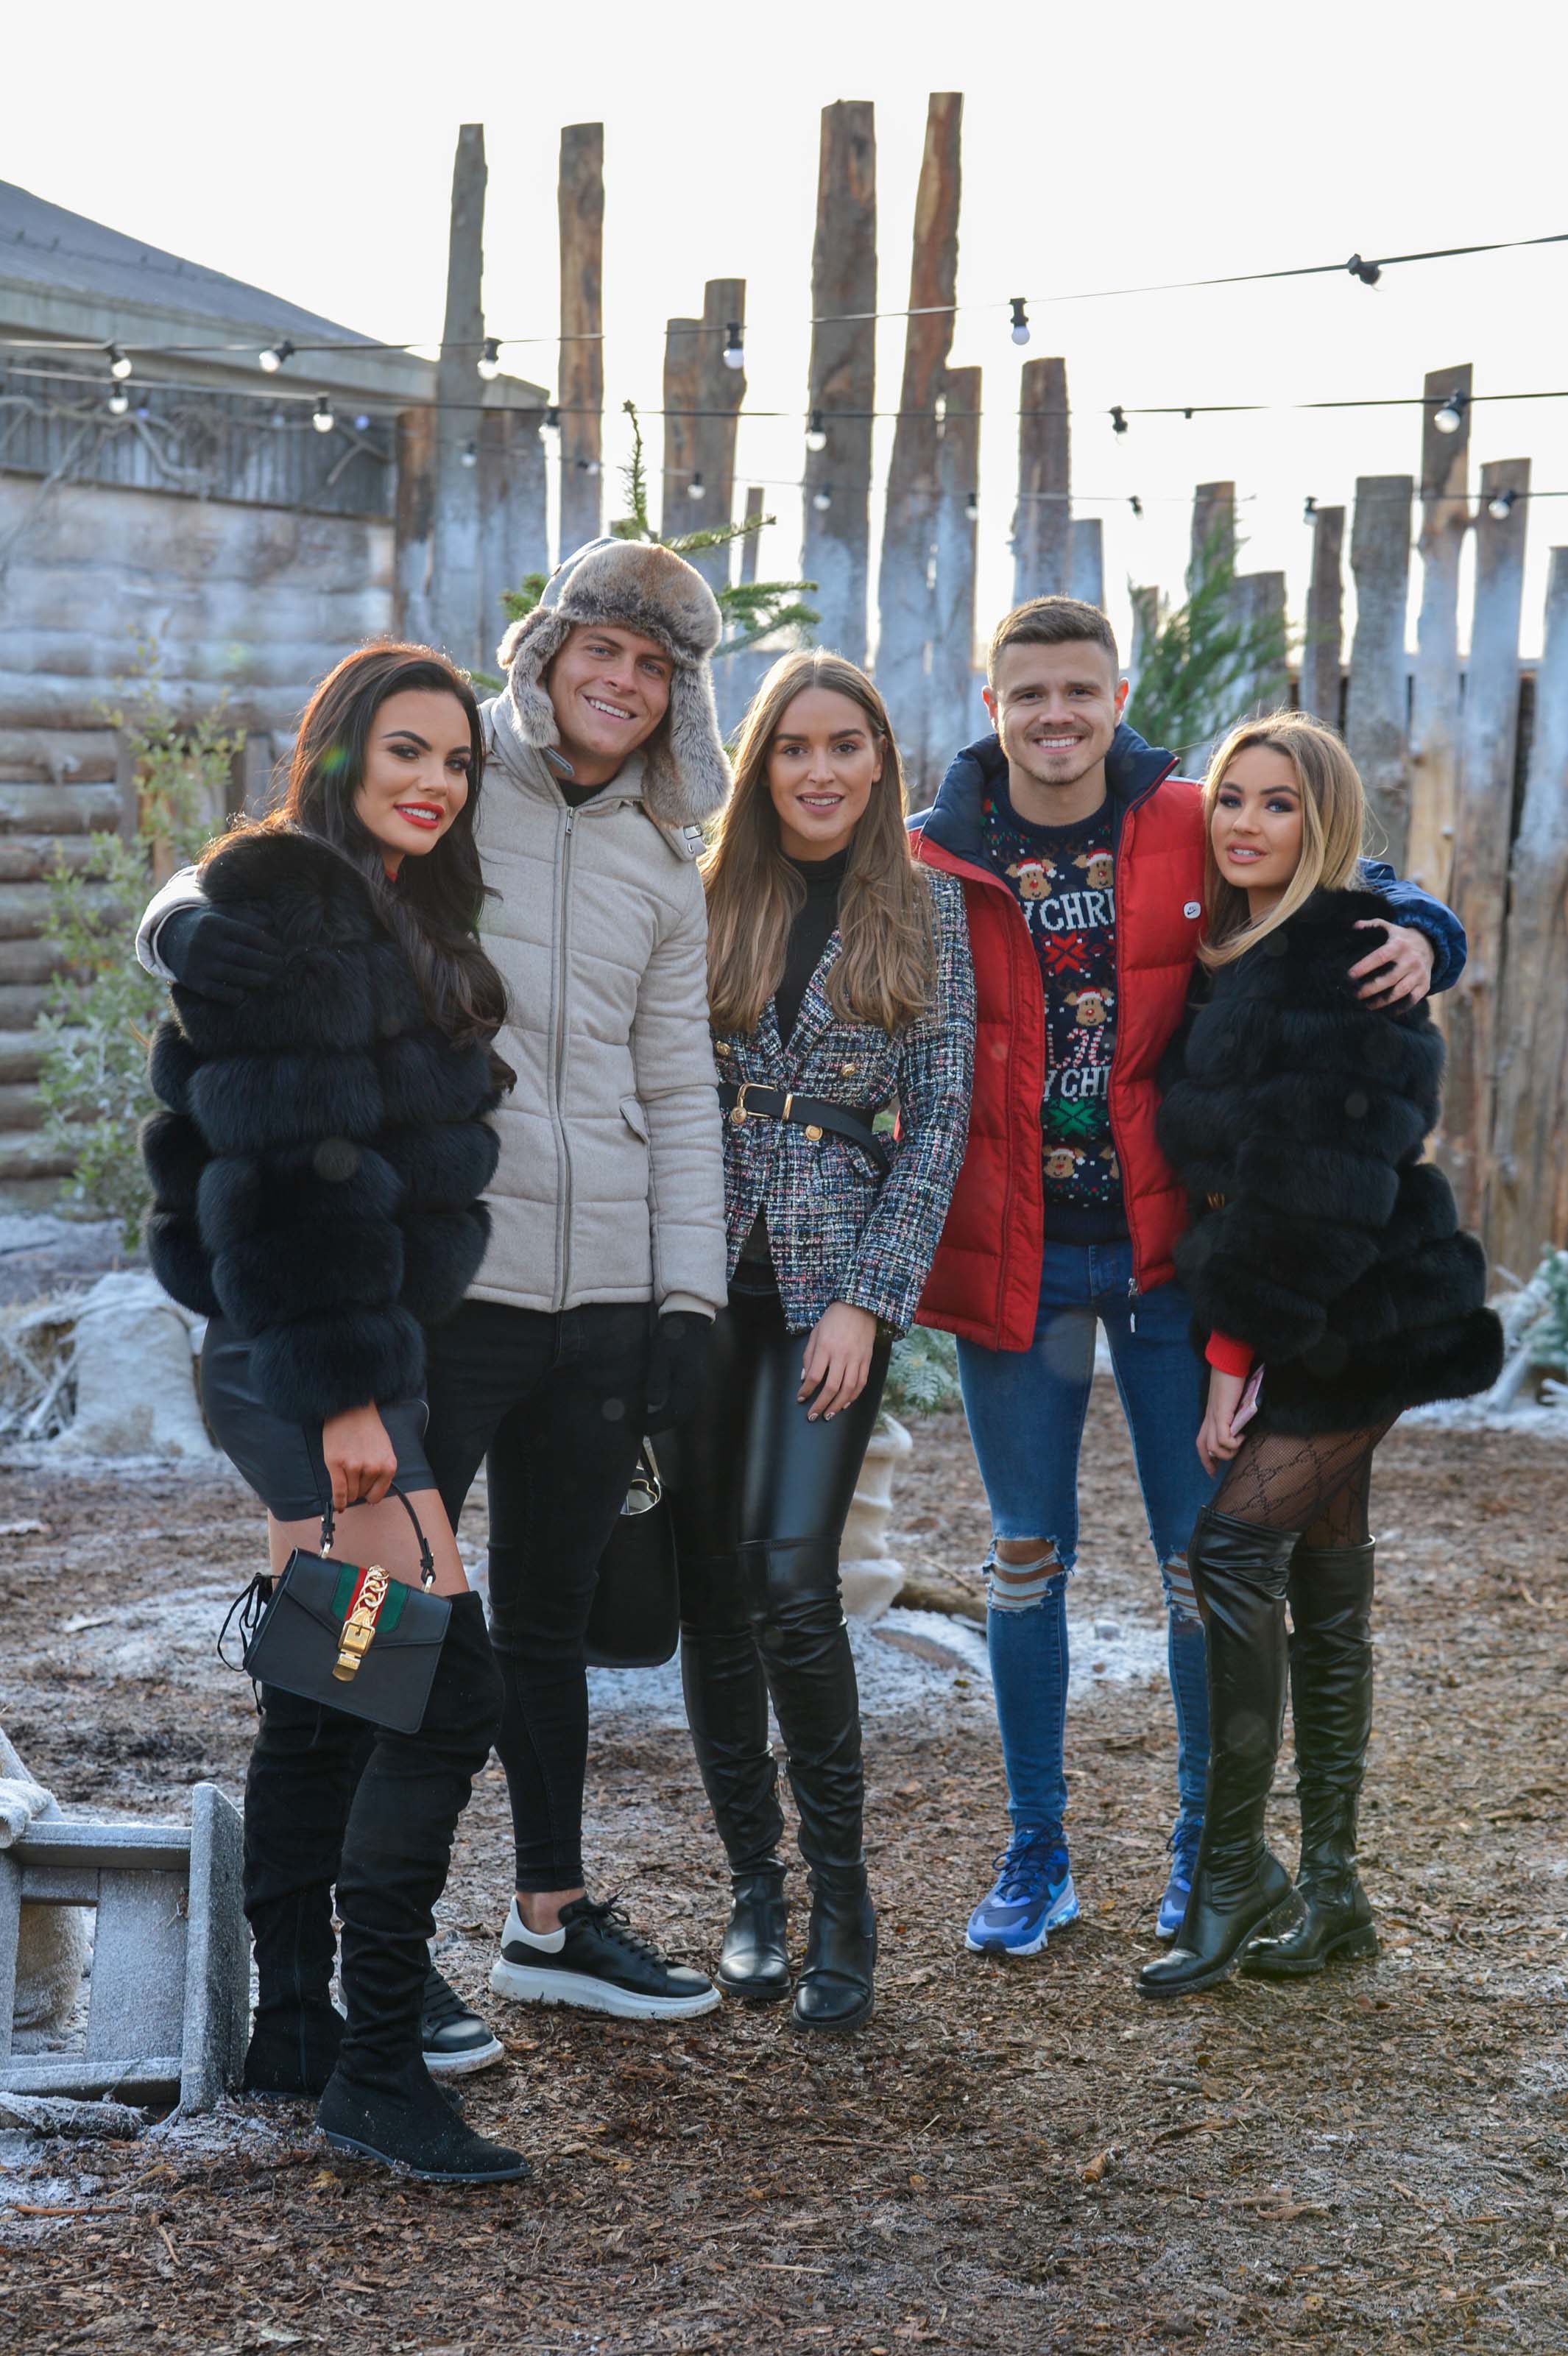 Chloe Ross at The Only Way is Essex Christmas Special filming